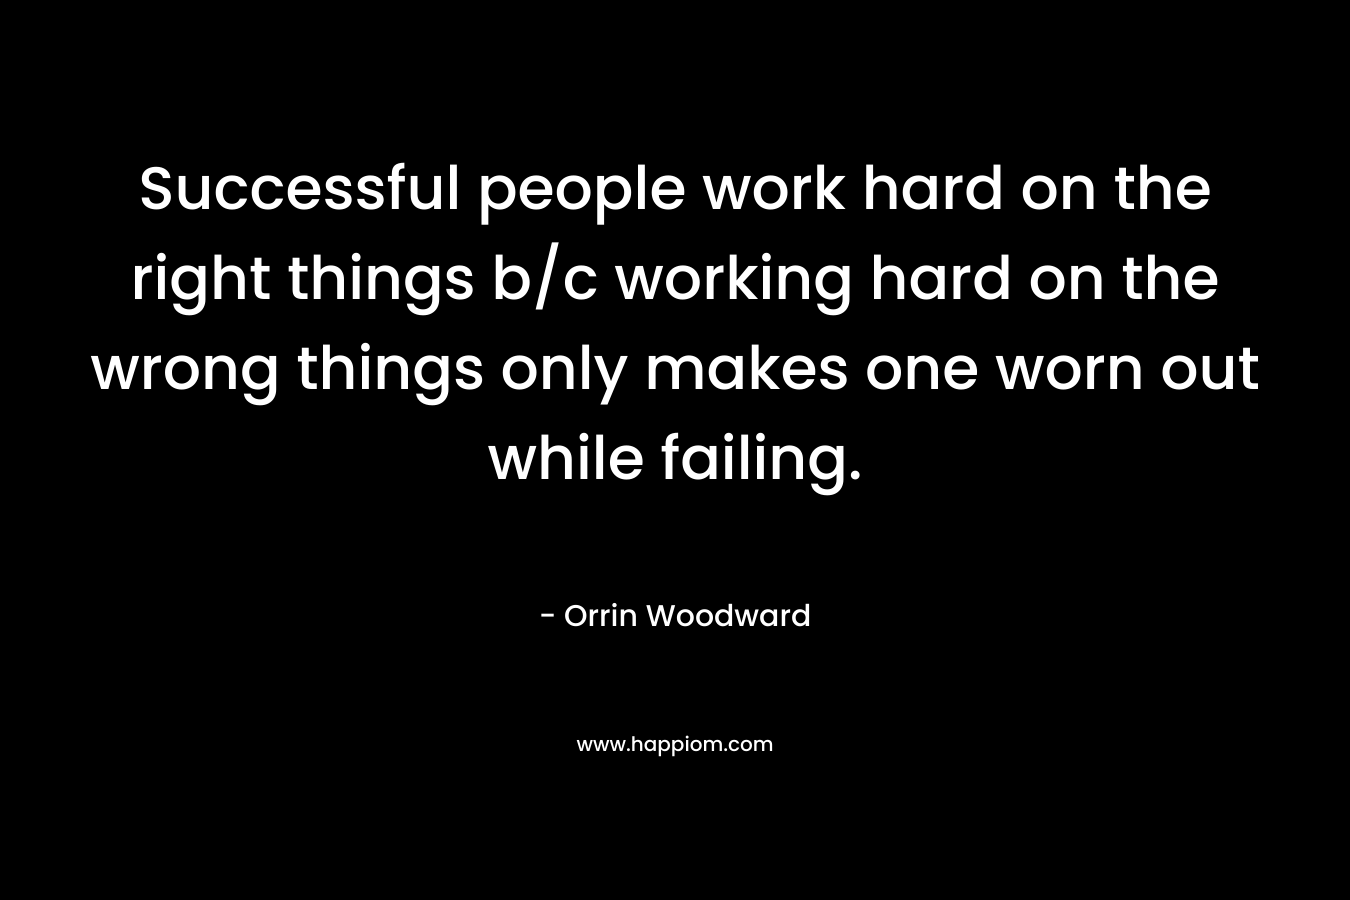 Successful people work hard on the right things b/c working hard on the wrong things only makes one worn out while failing. – Orrin Woodward